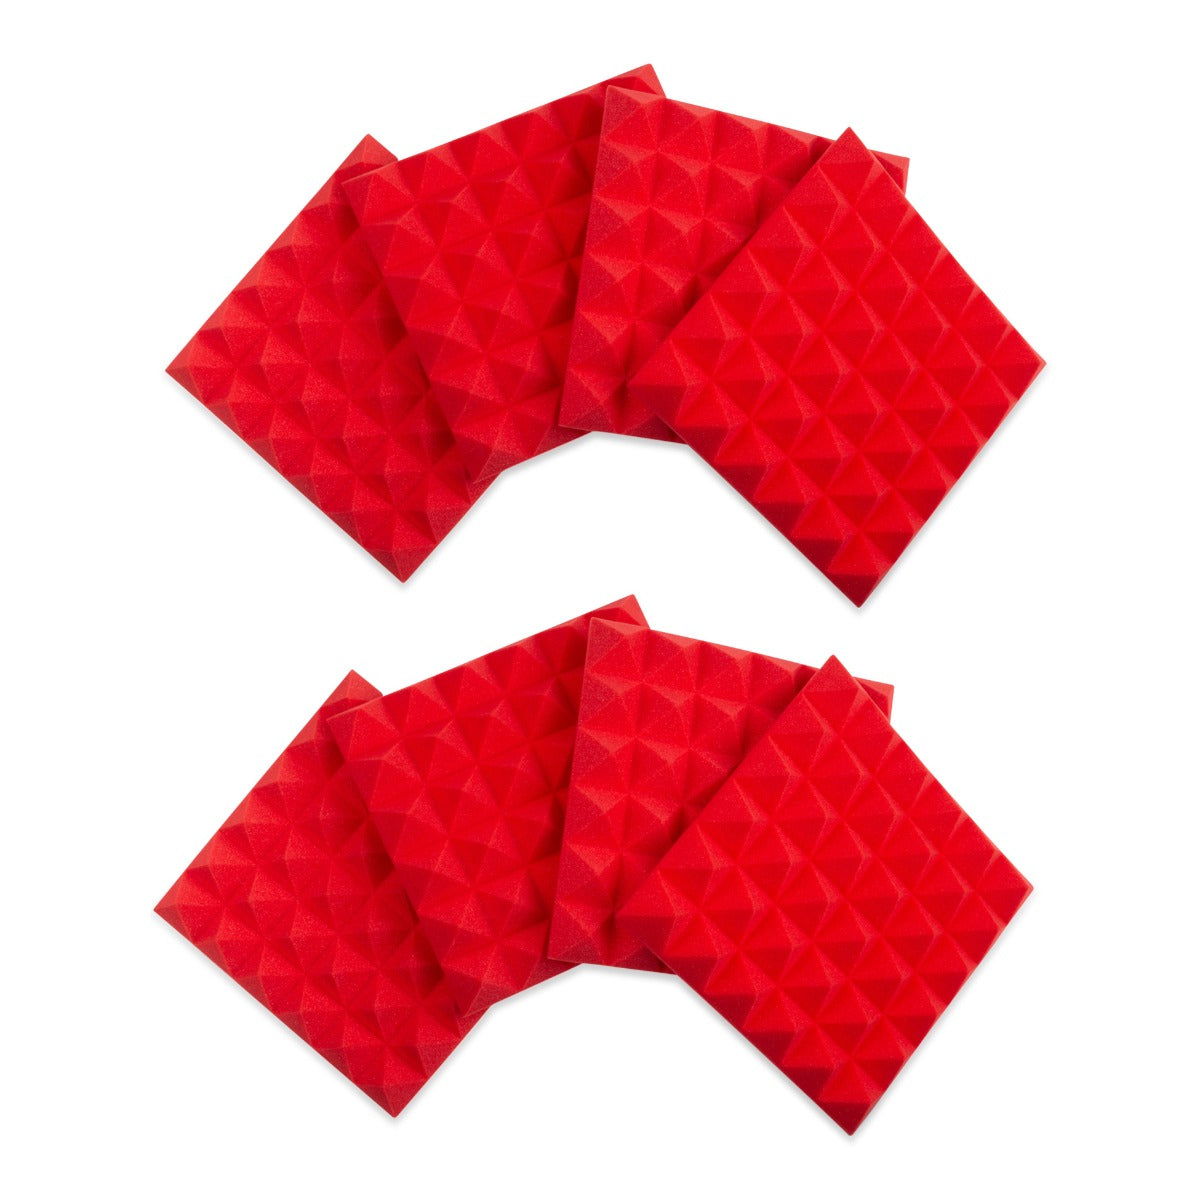 Collective image of the Gator Frameworks 8 Pack of 12x12" Acoustic Pyramid Panels - Red